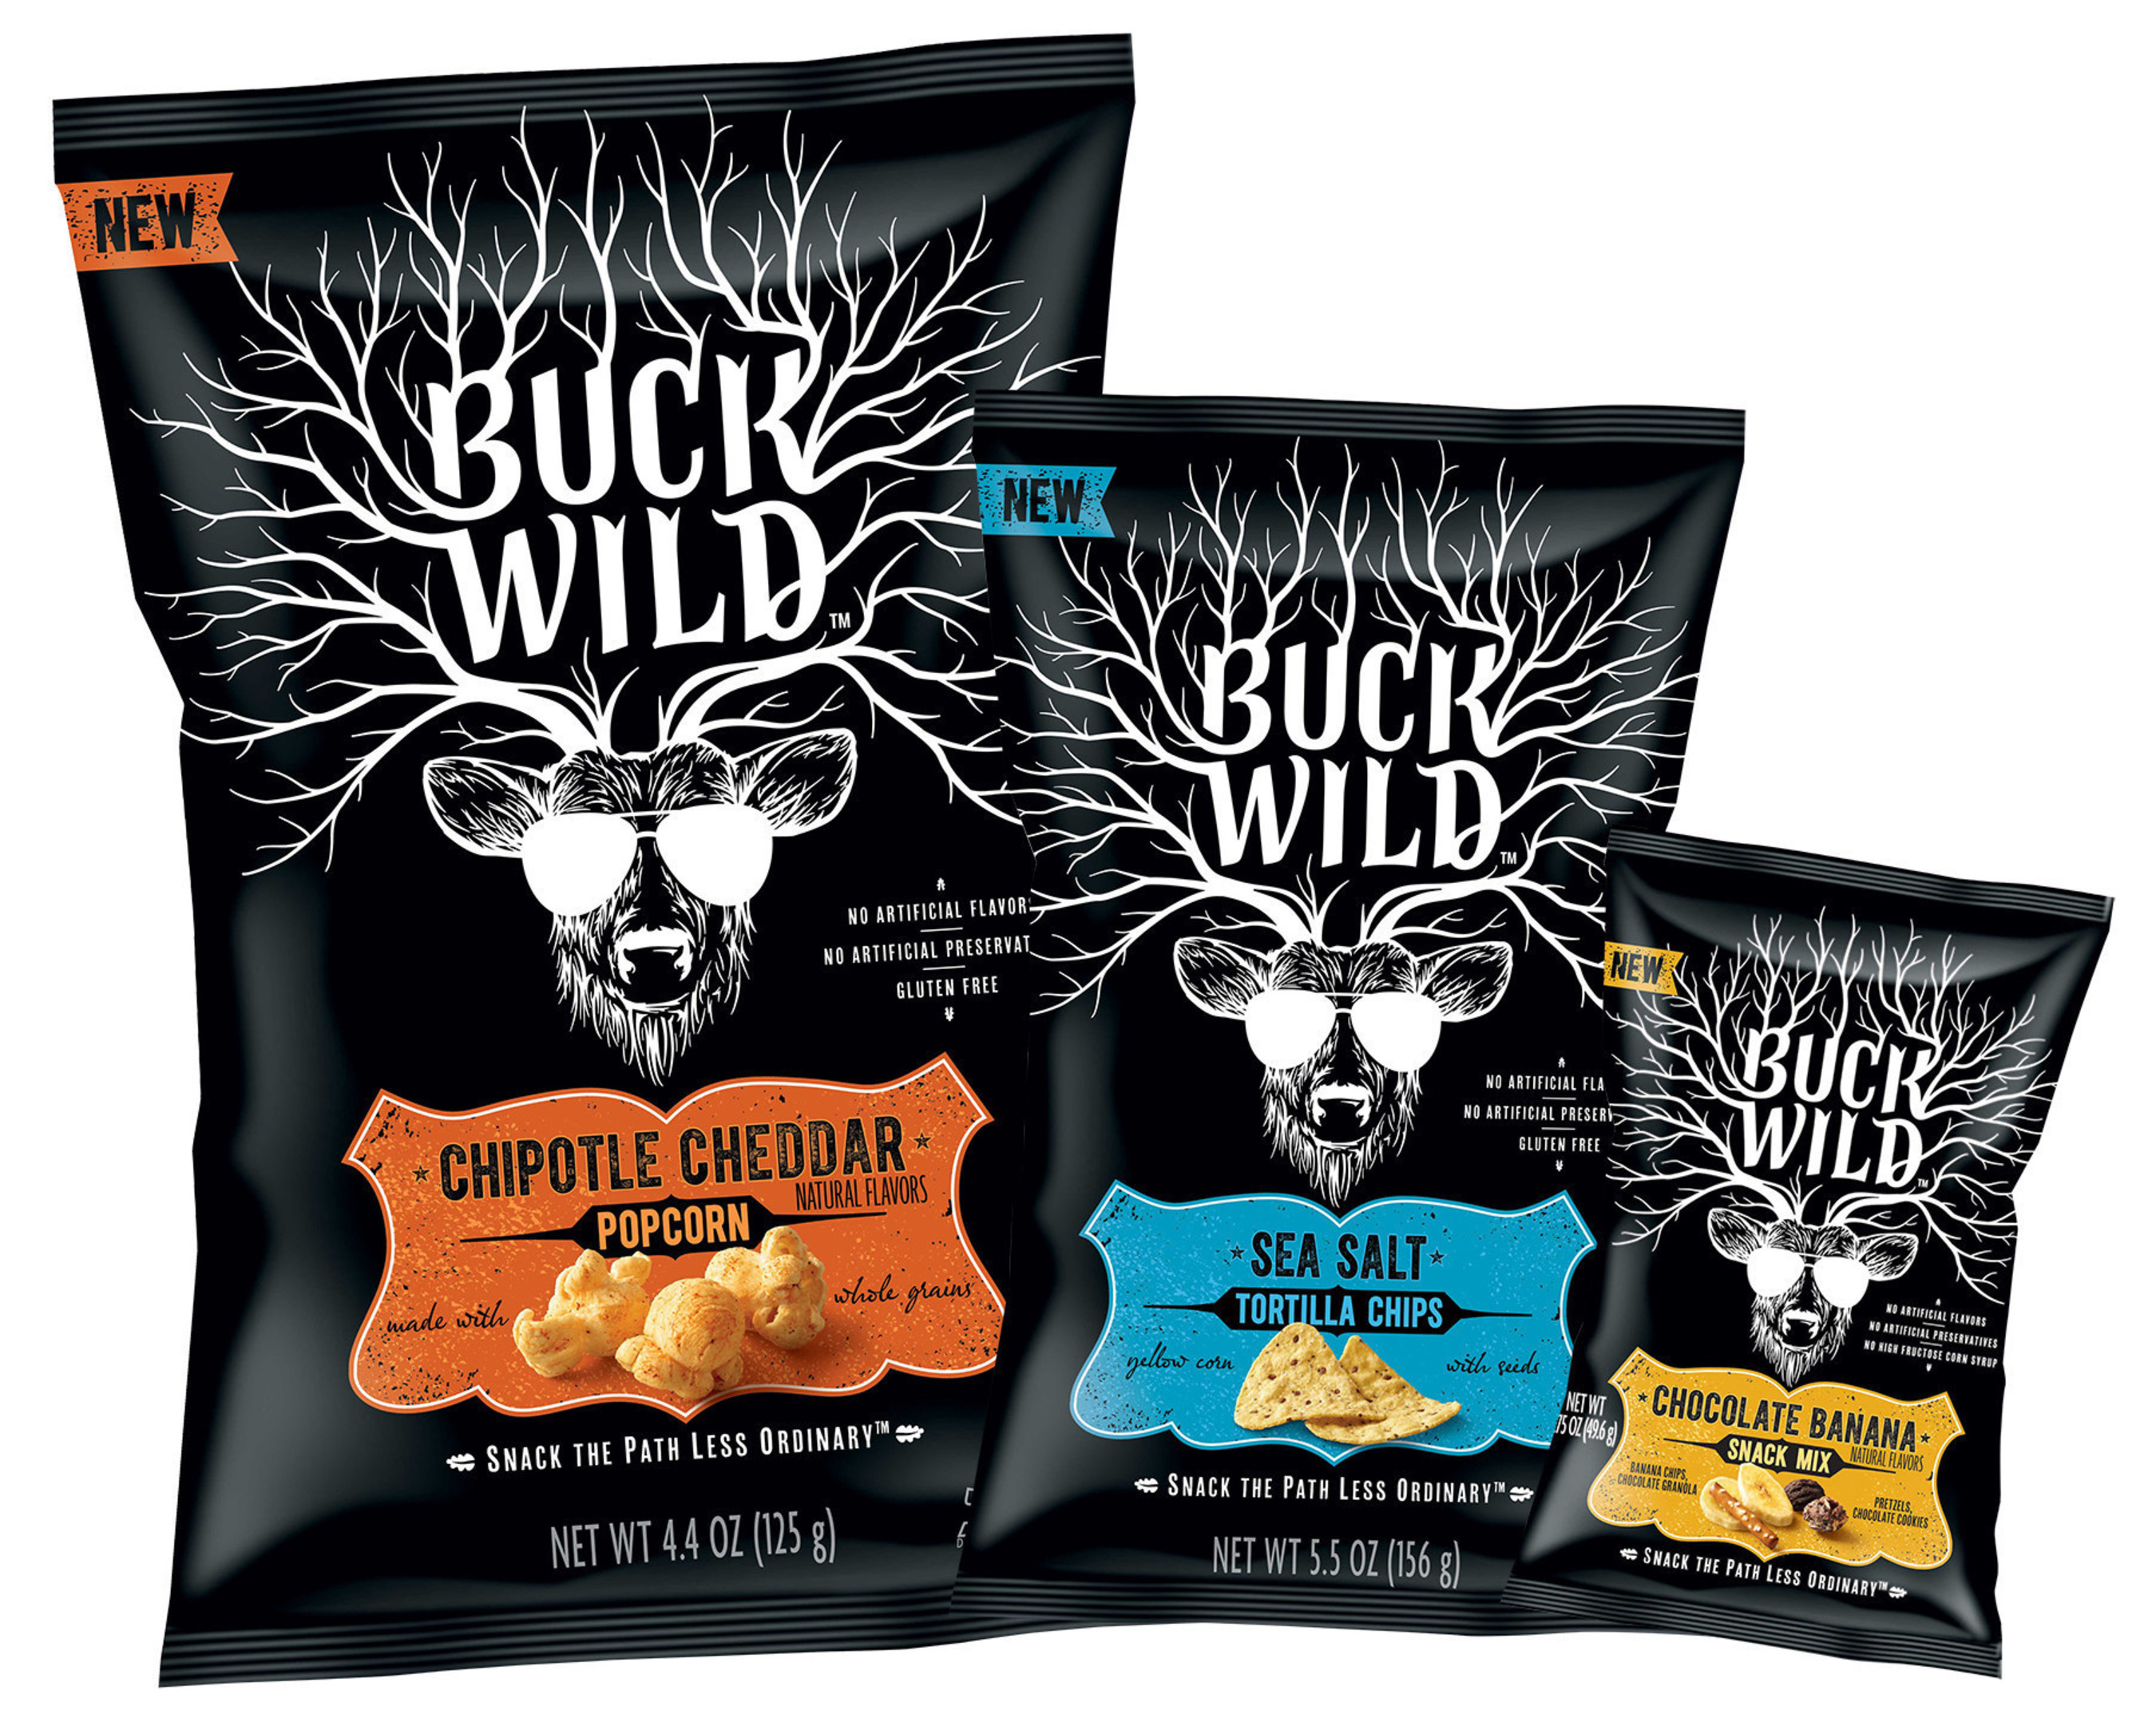 The new Buck Wild snack line includes Popcorn, Tortilla Chips and Snack Mixes made with real ingredients in a variety of complex and bold flavors.